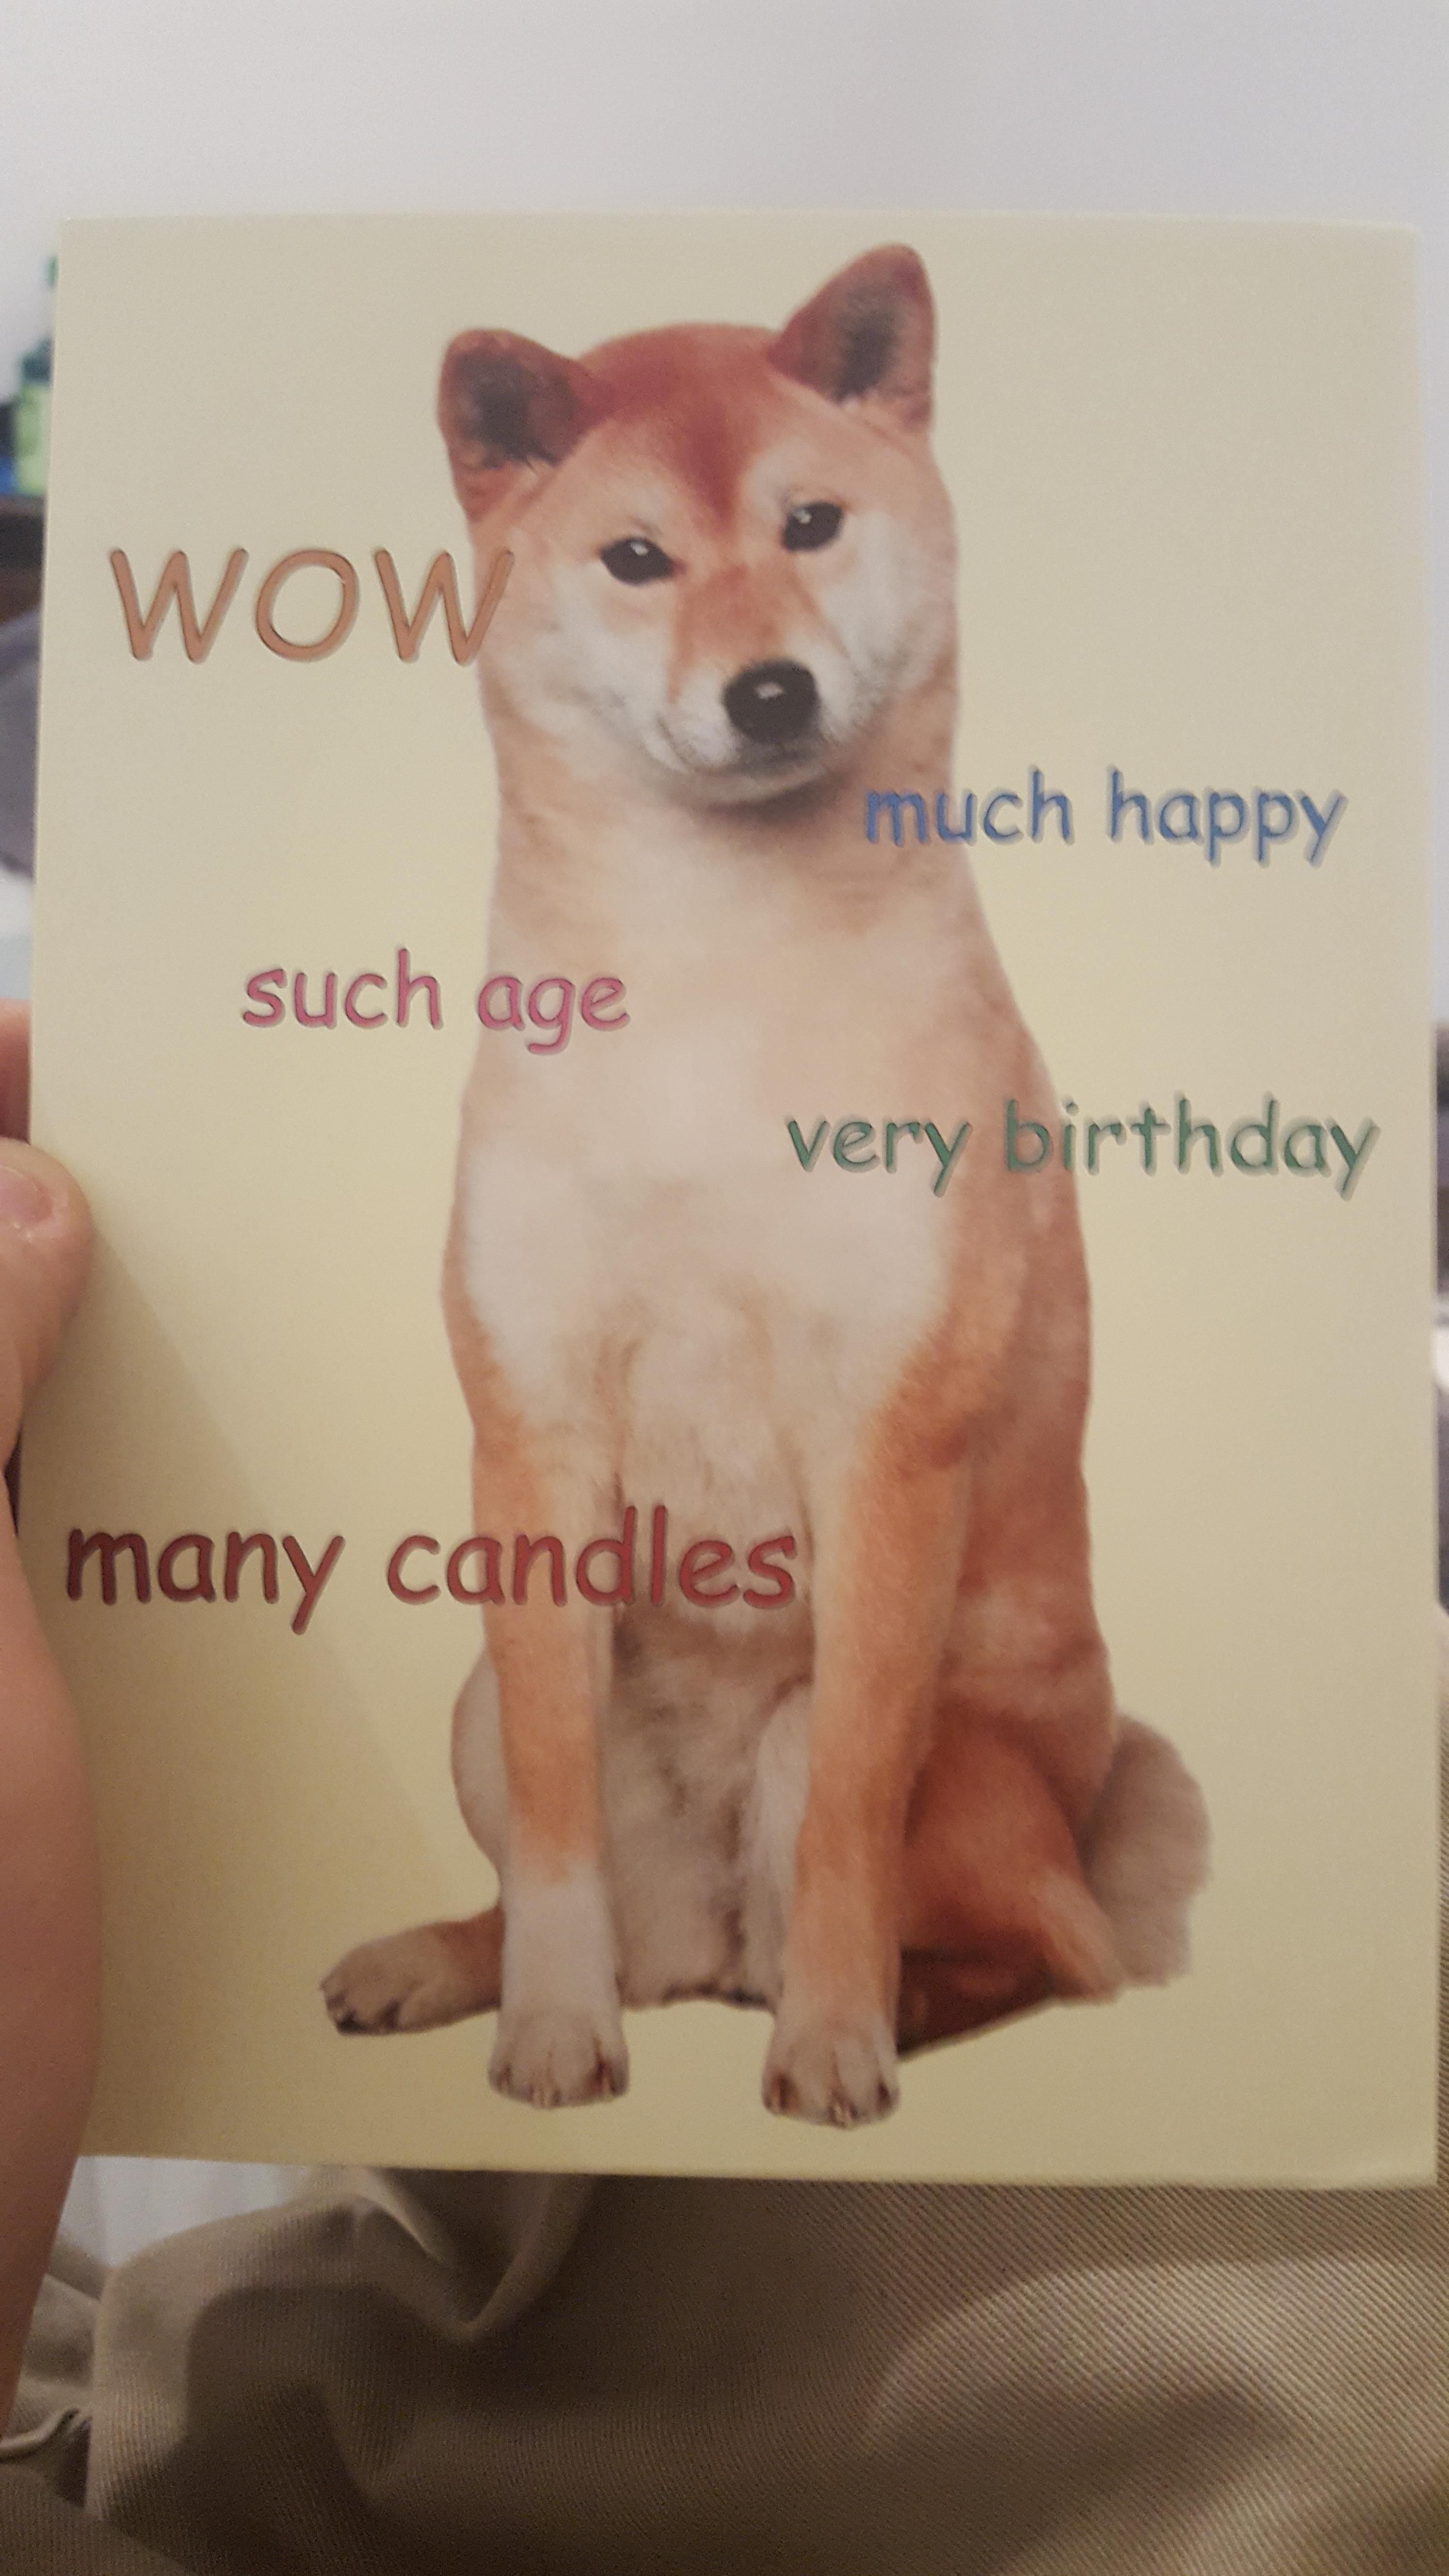 This is the birthday card my mom sent me this year.